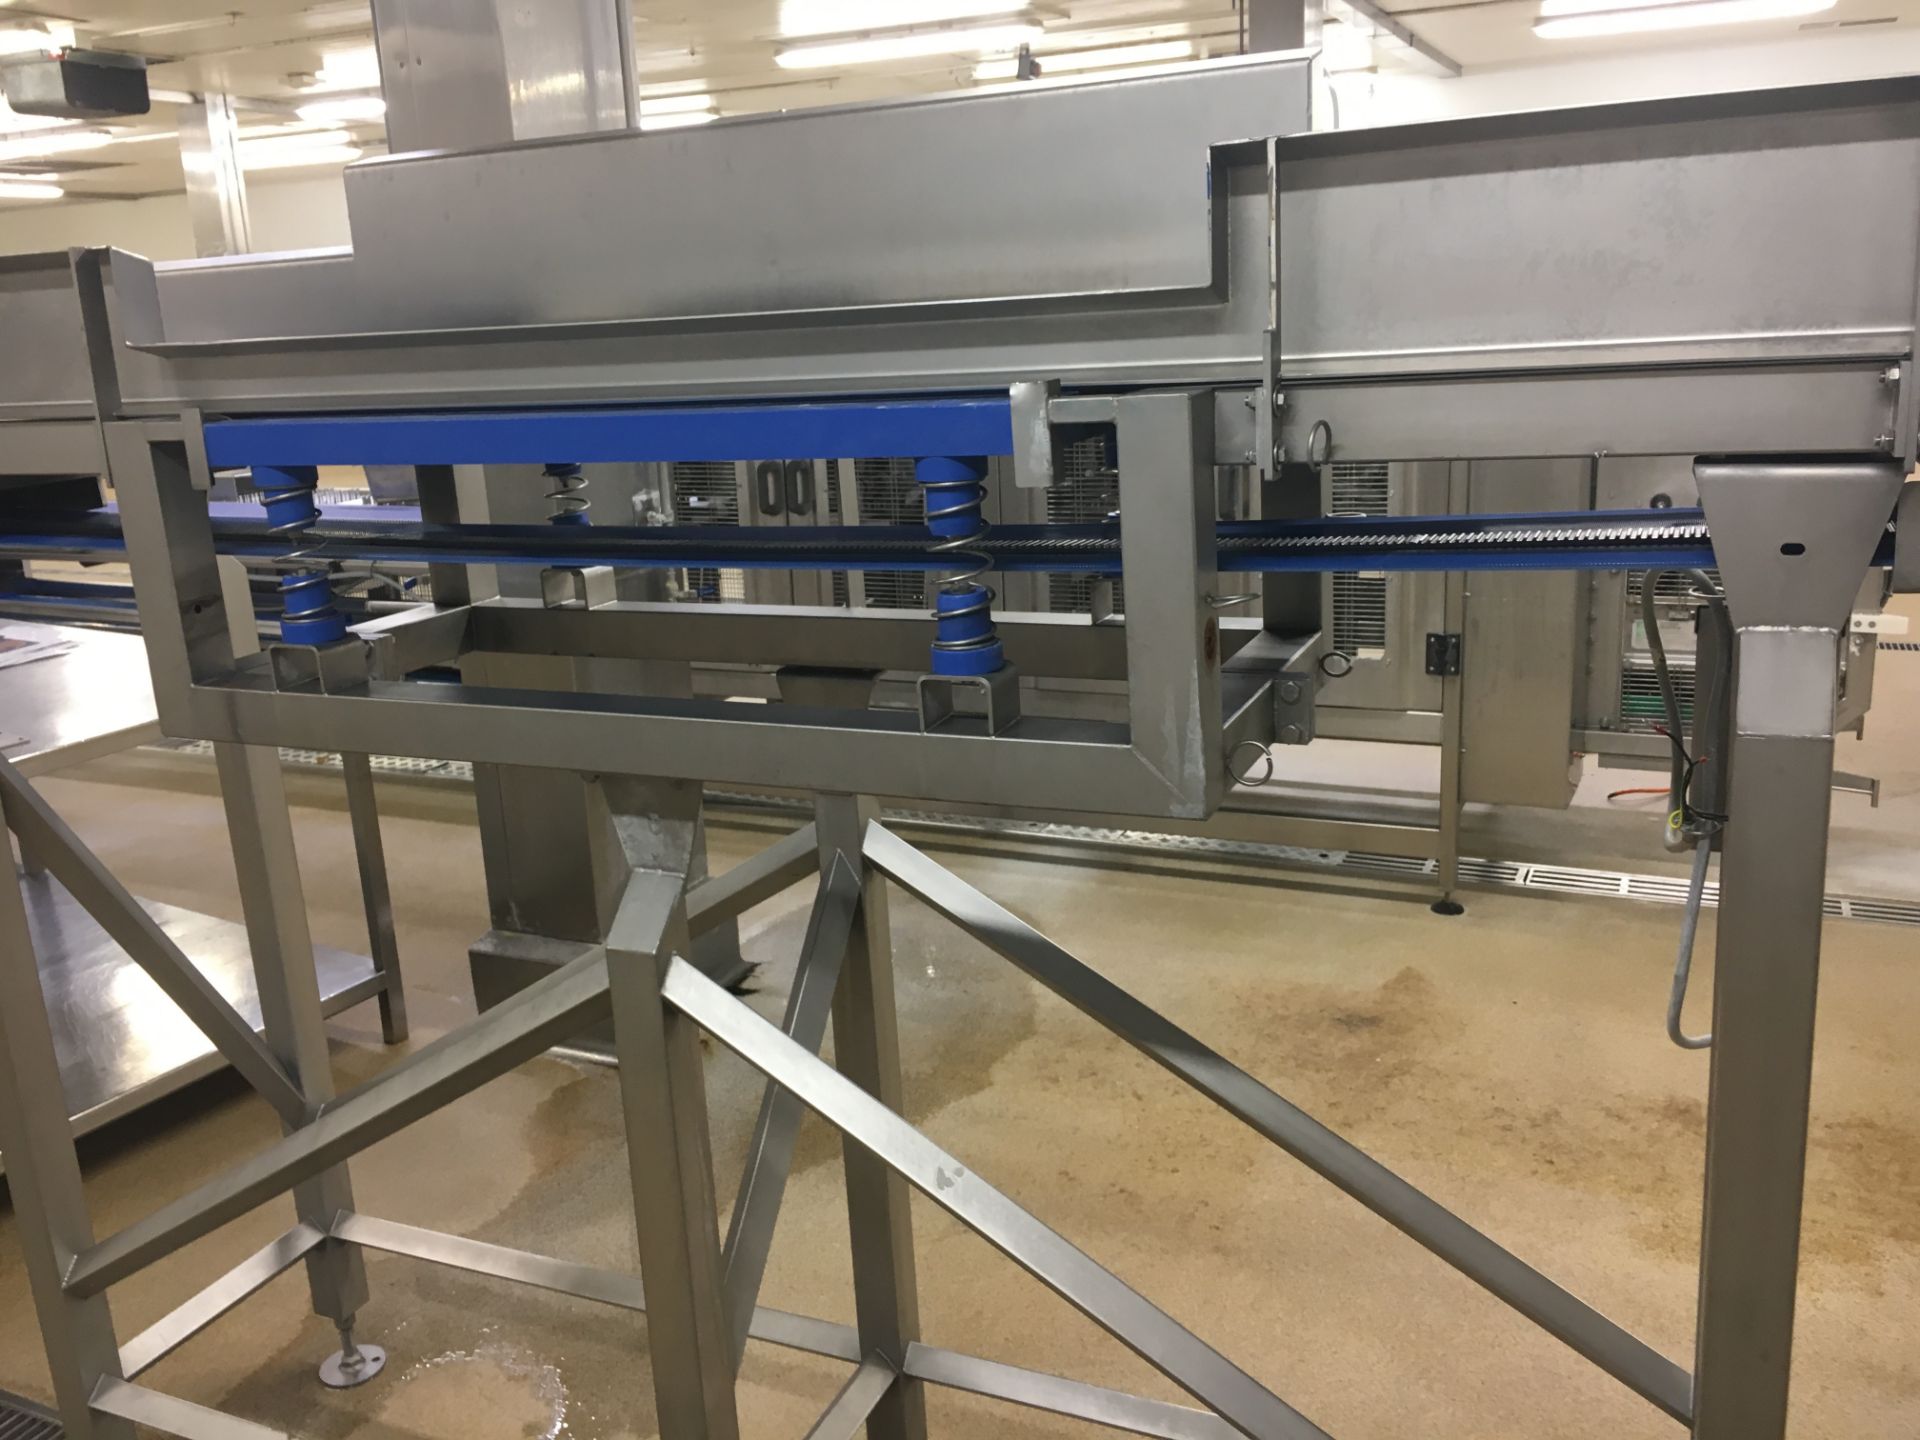 Pineapple or Mango washing flume with spring exit conveyor for soft landing. LO £200 - Image 3 of 4